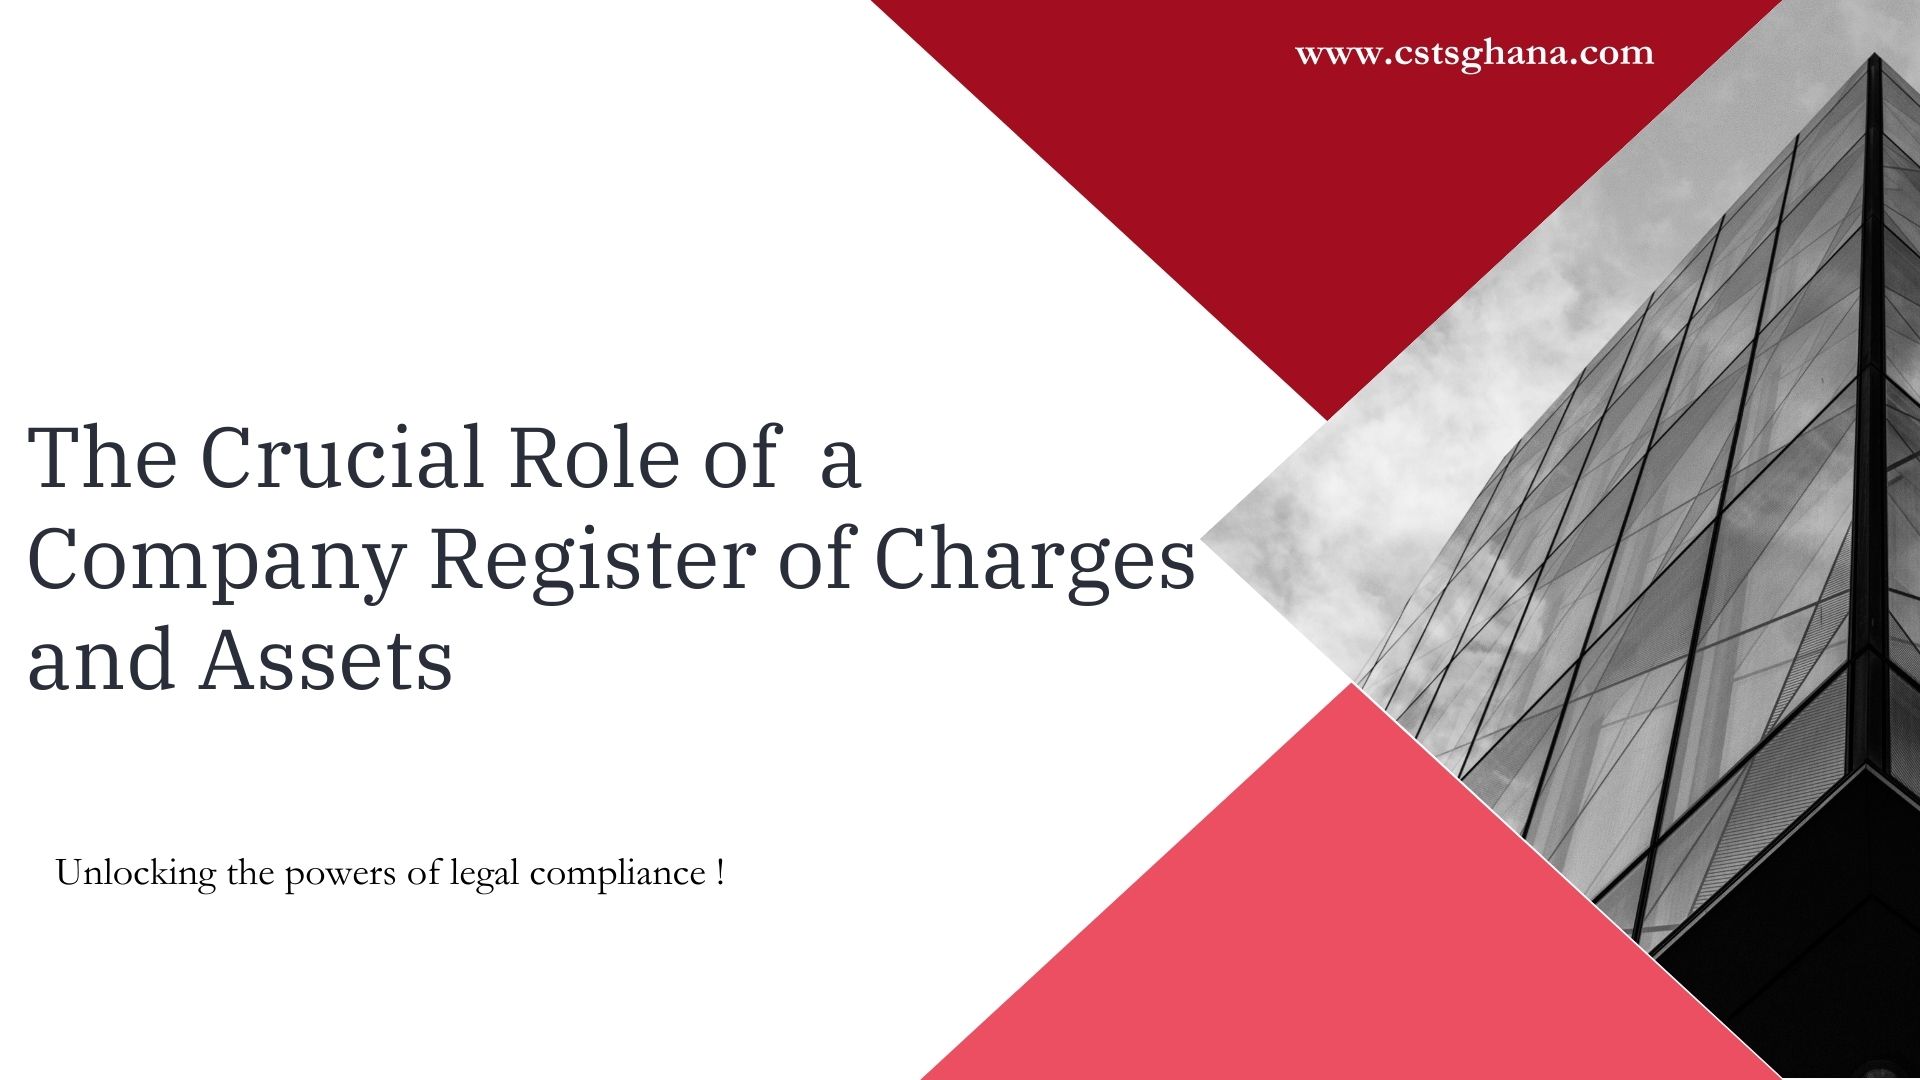 The crucial role of a company registers of charges and assets